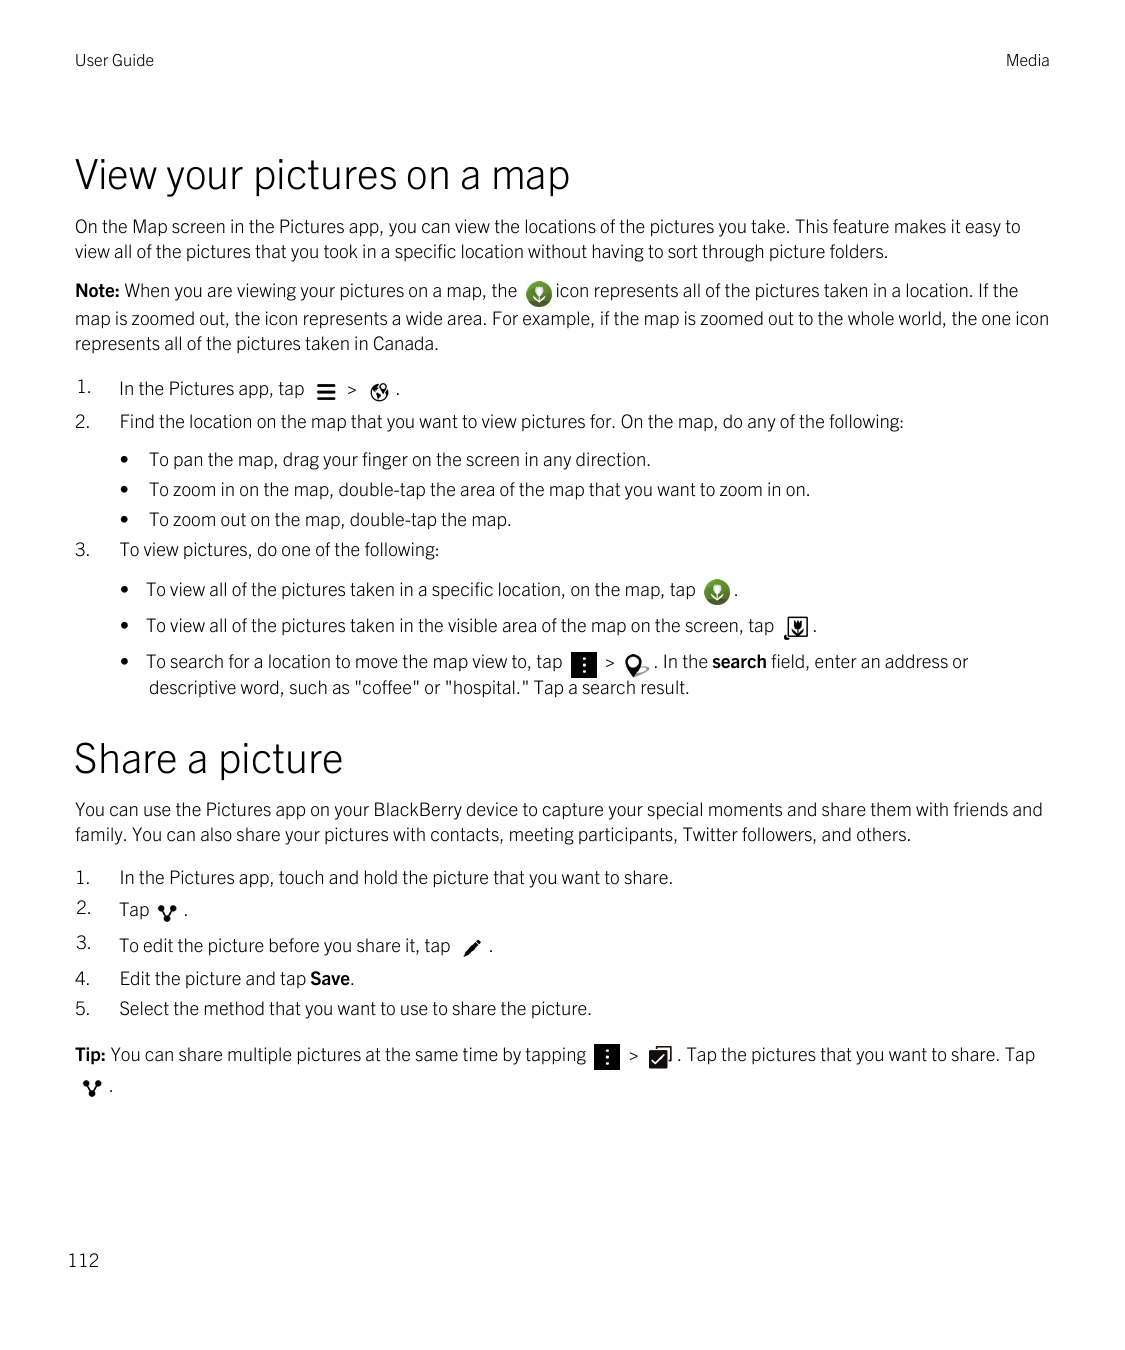 User GuideMediaView your pictures on a mapOn the Map screen in the Pictures app, you can view the locations of the pictures you 